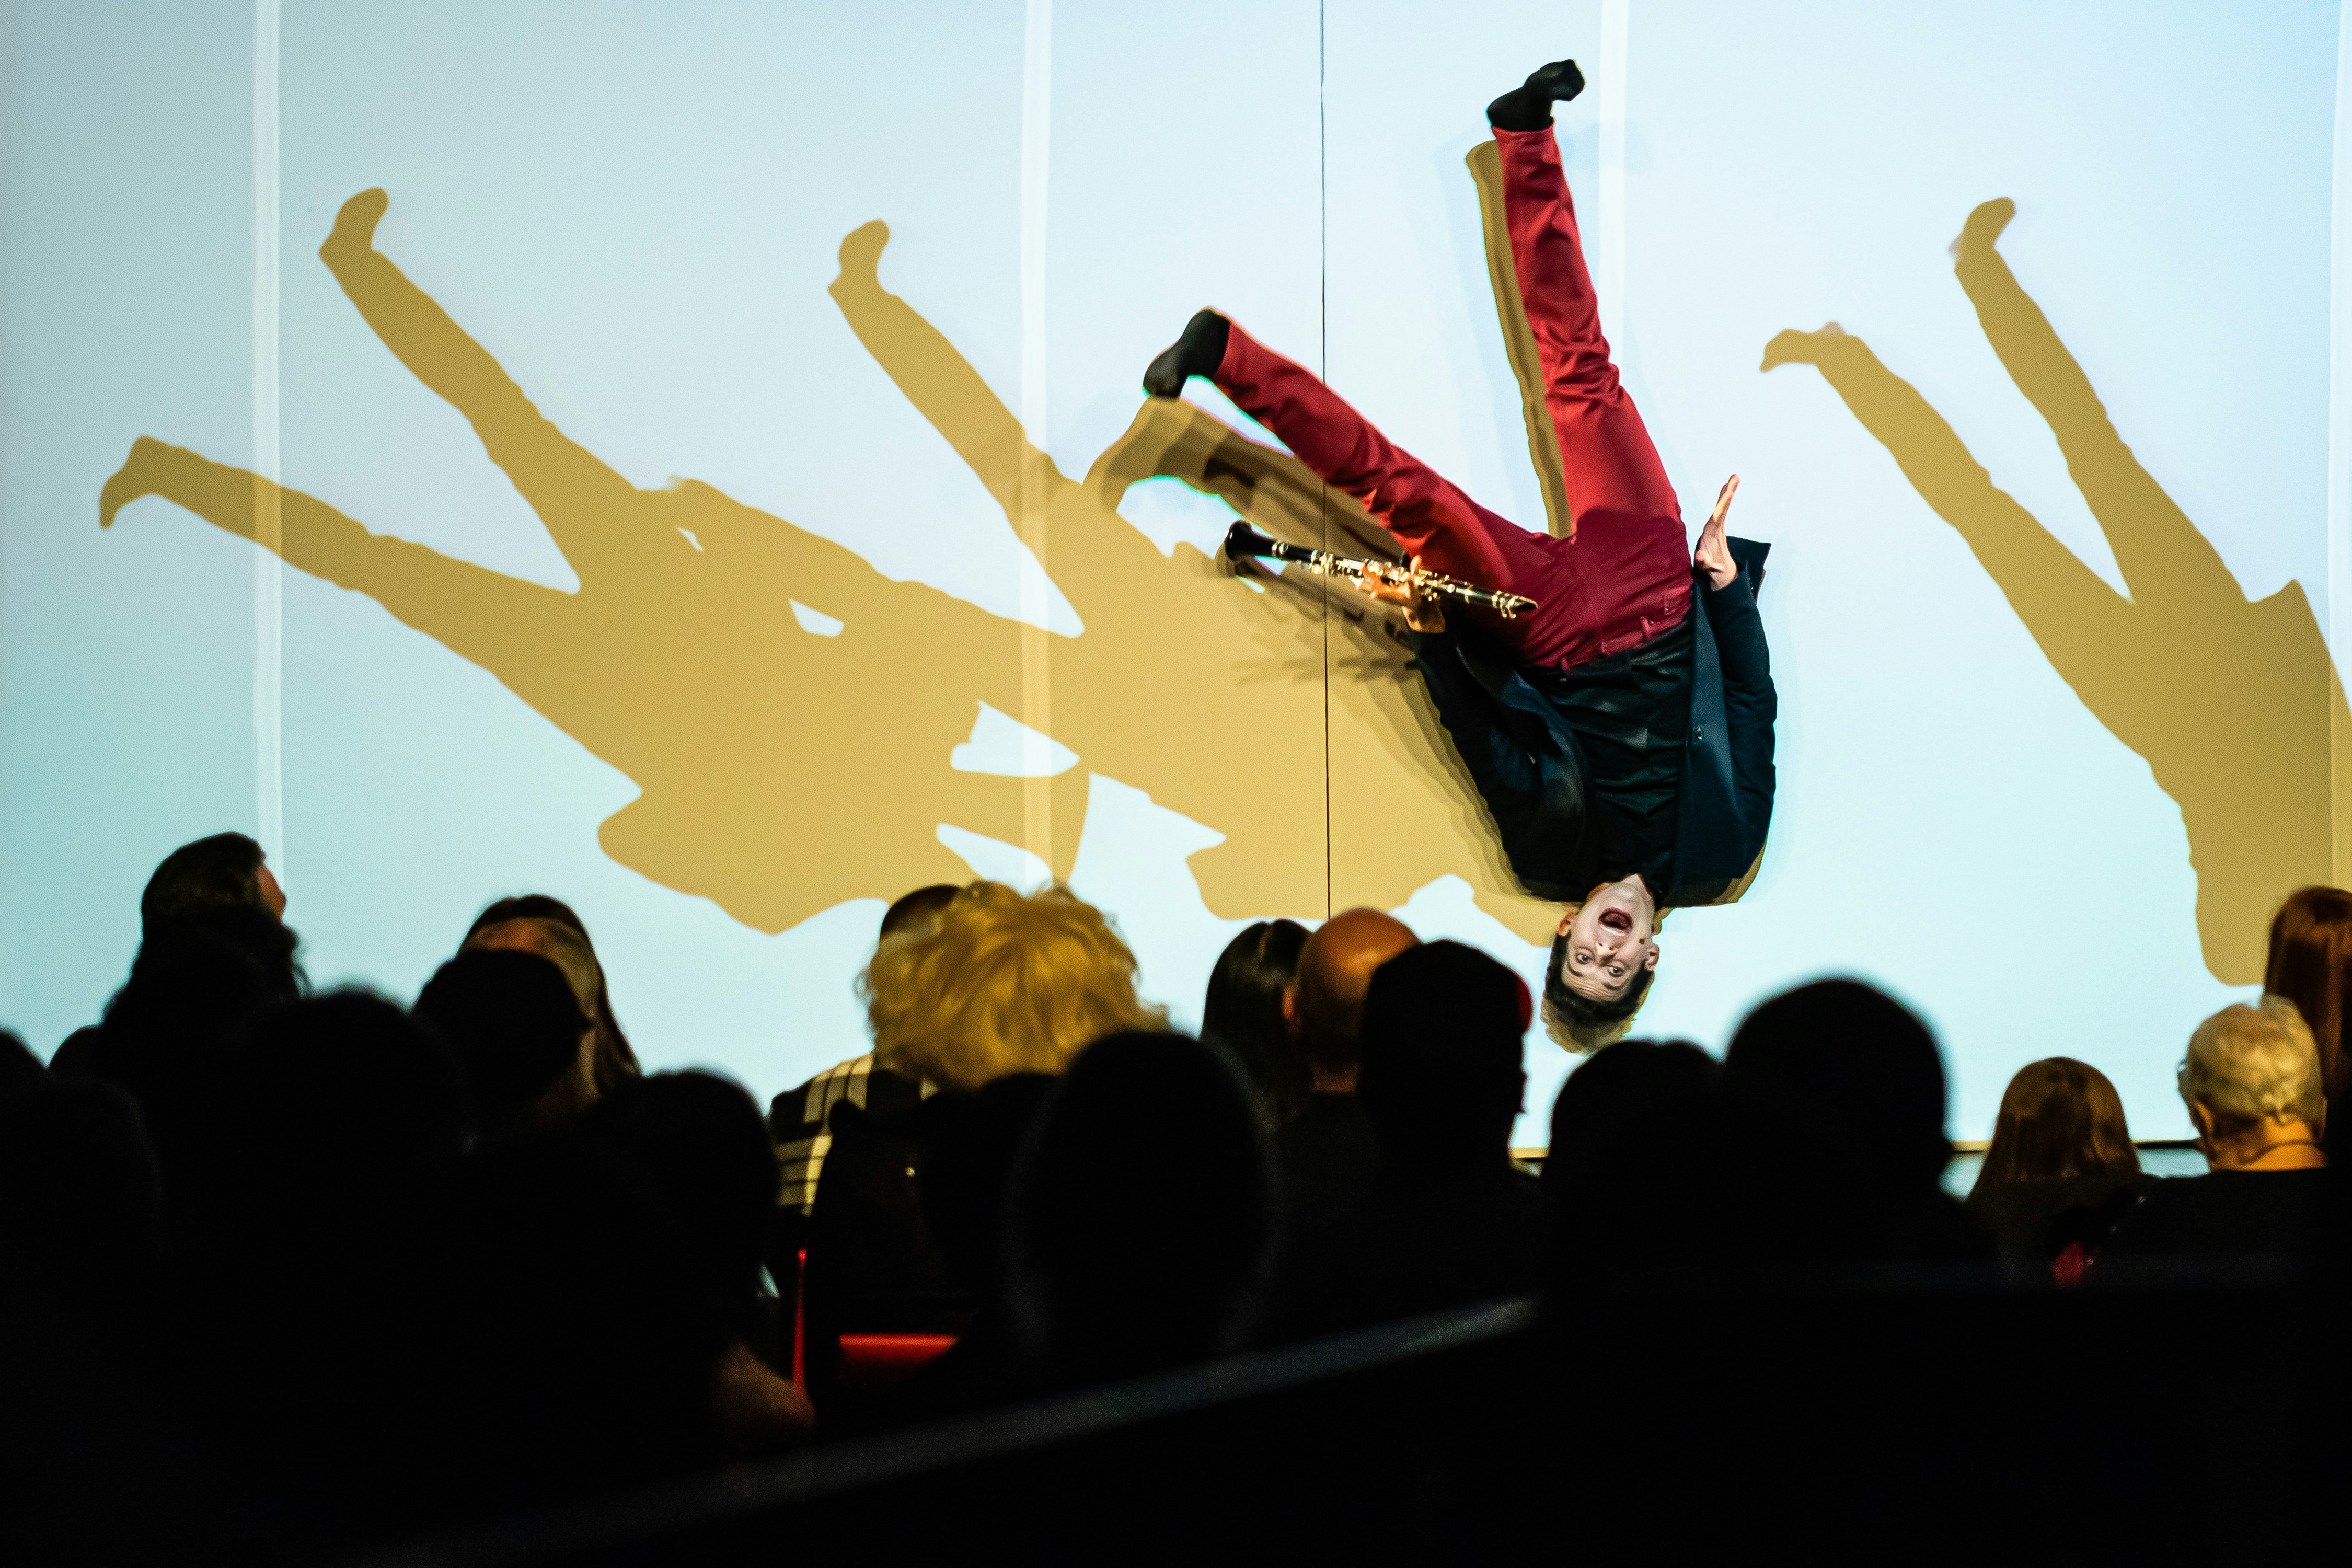 A photo taken from the stalls, as magician Xavier Mortimer flails upside down on stage, holding a clarinet. Four shadows beside him are in a similar pose.